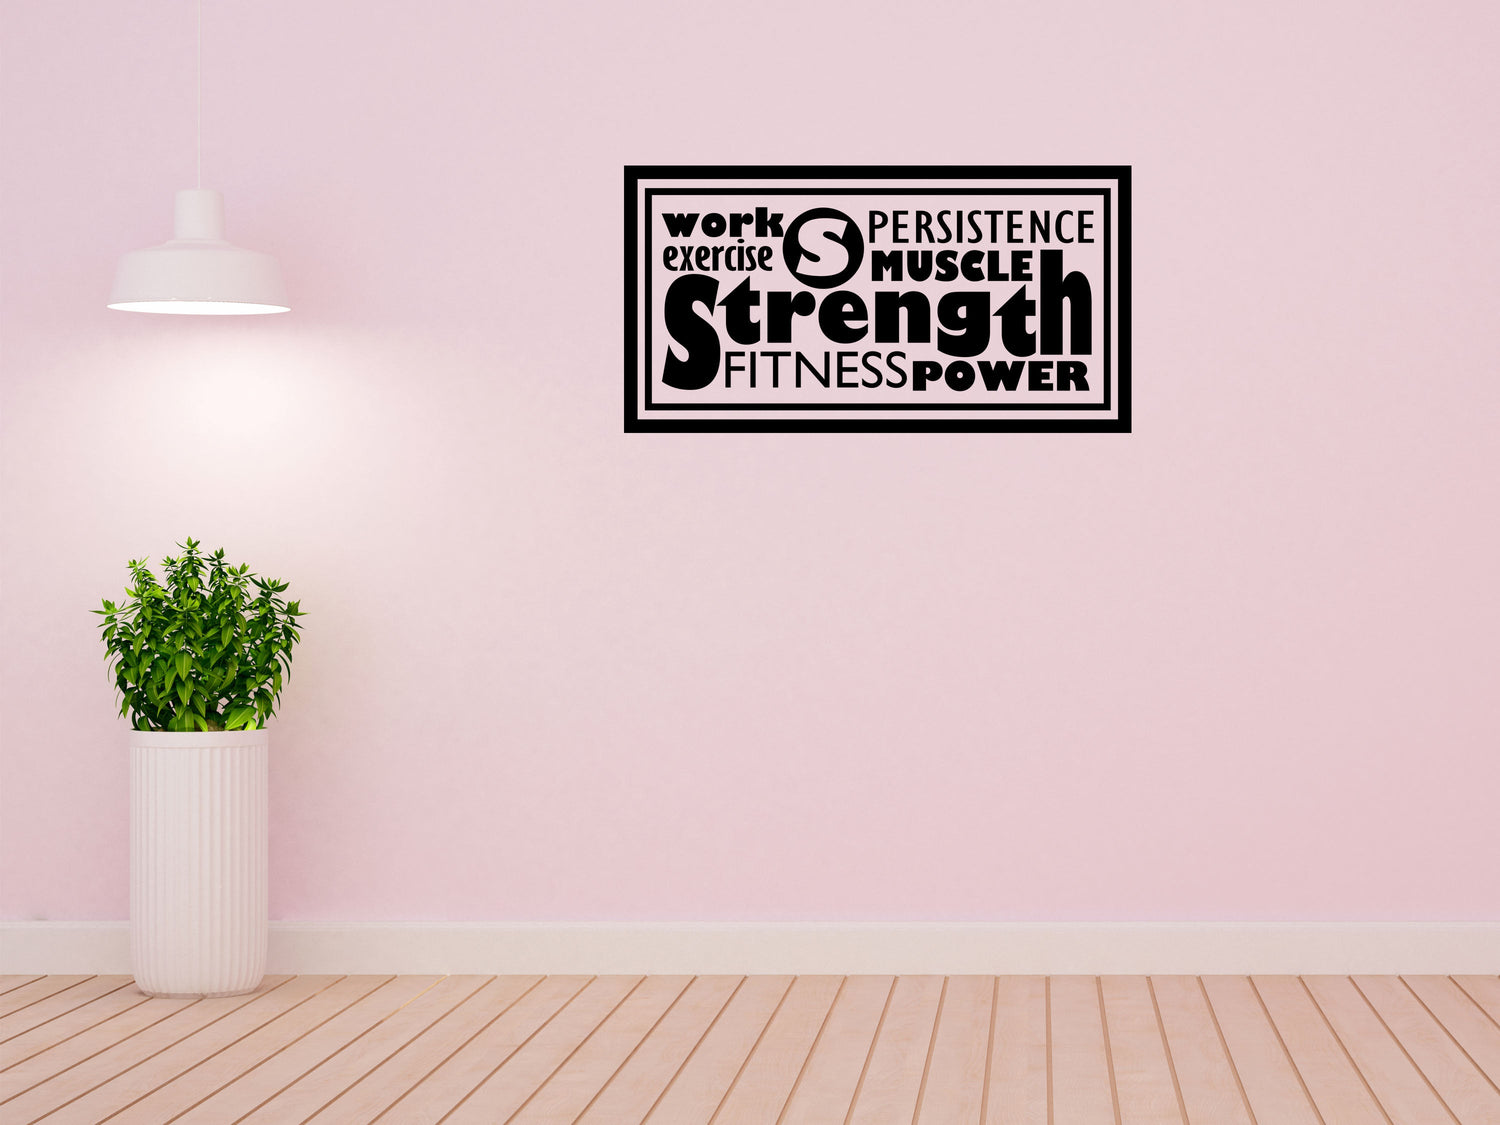 Work Exercise Office Wall Sticker - Inspirational Wall Decals Done 